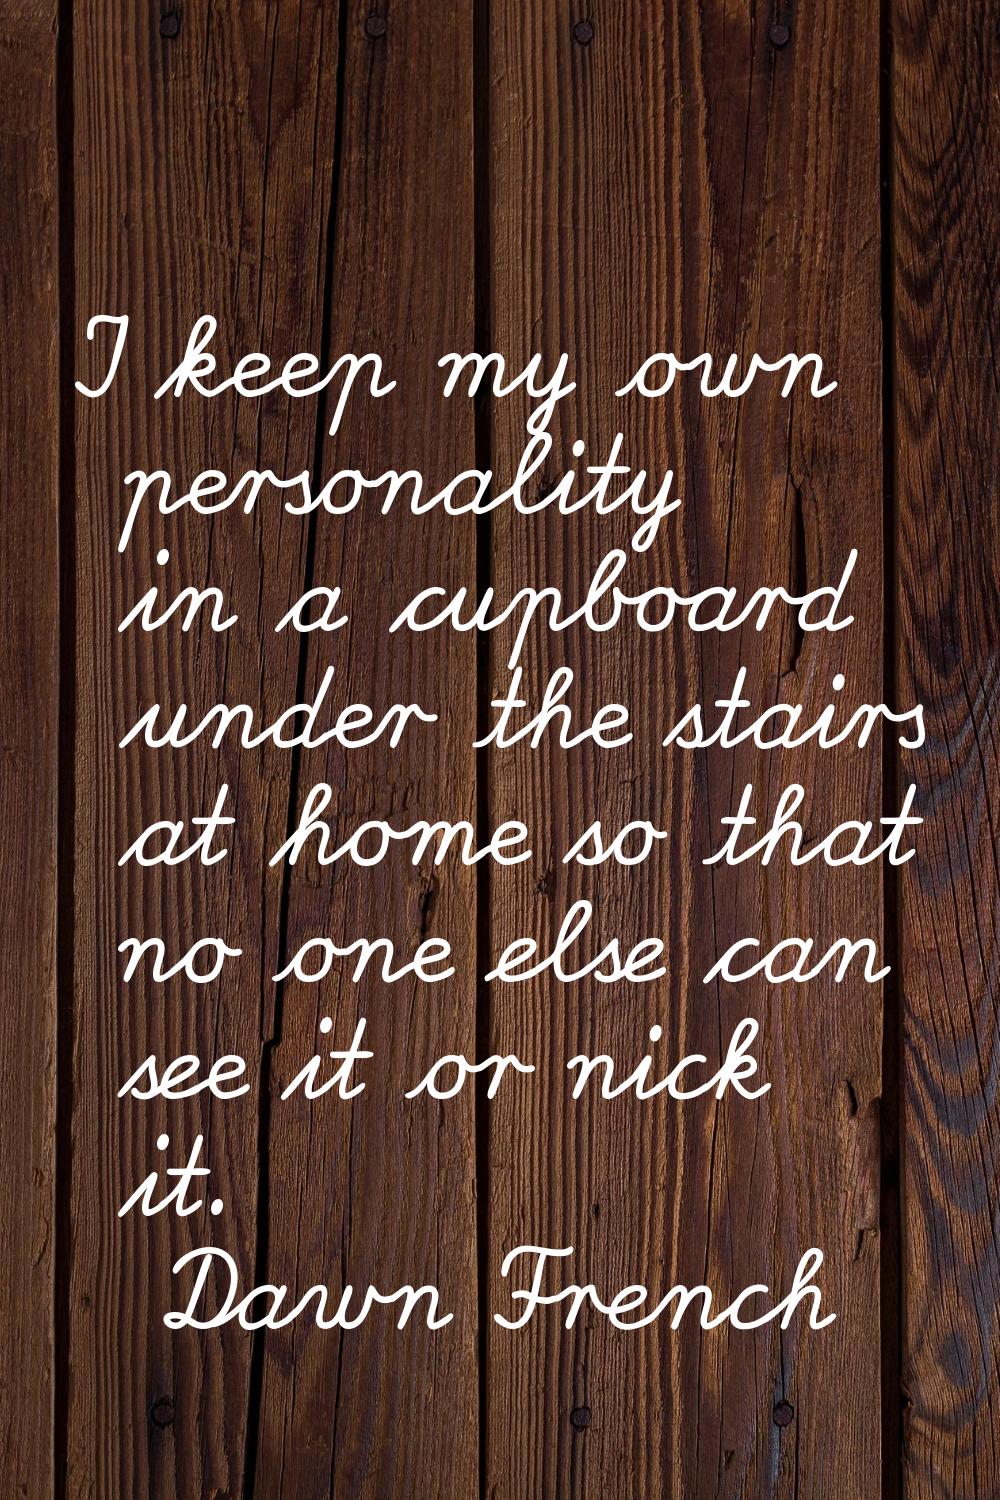 I keep my own personality in a cupboard under the stairs at home so that no one else can see it or 